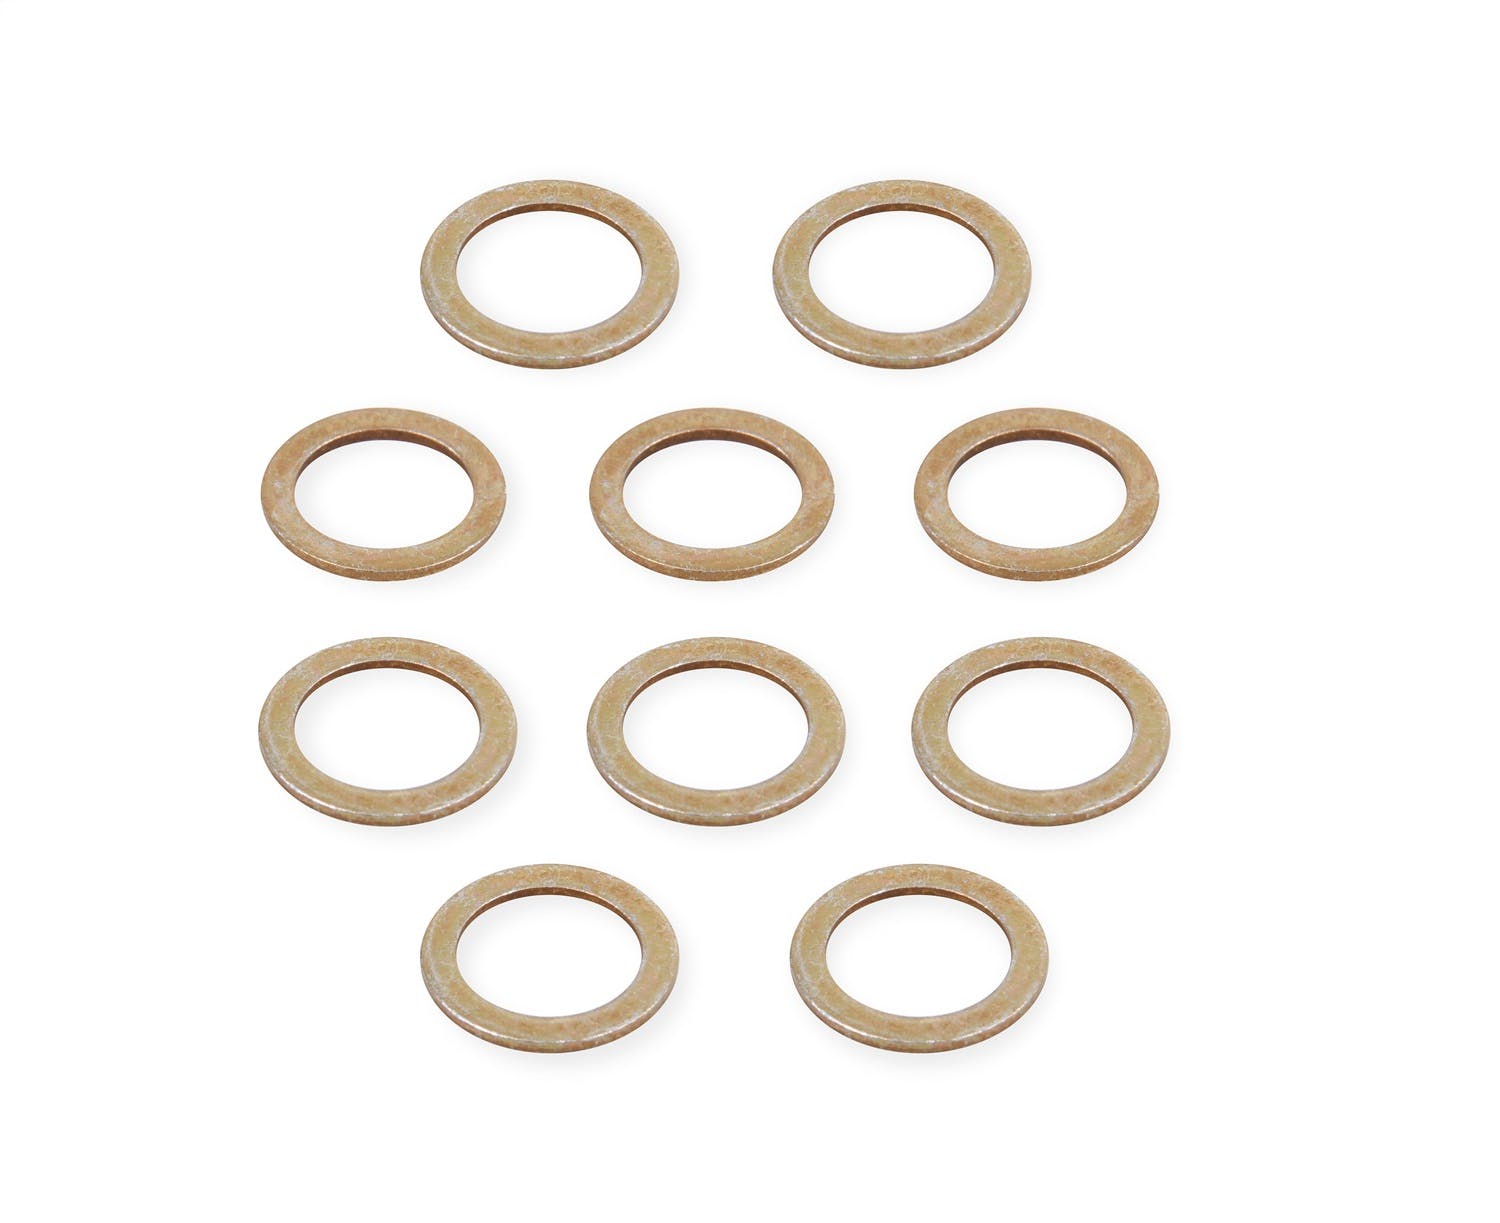 Earl's Performance Plumbing 177106ERL -6 COPPER CRUSH WASHER - PKG. OF 10